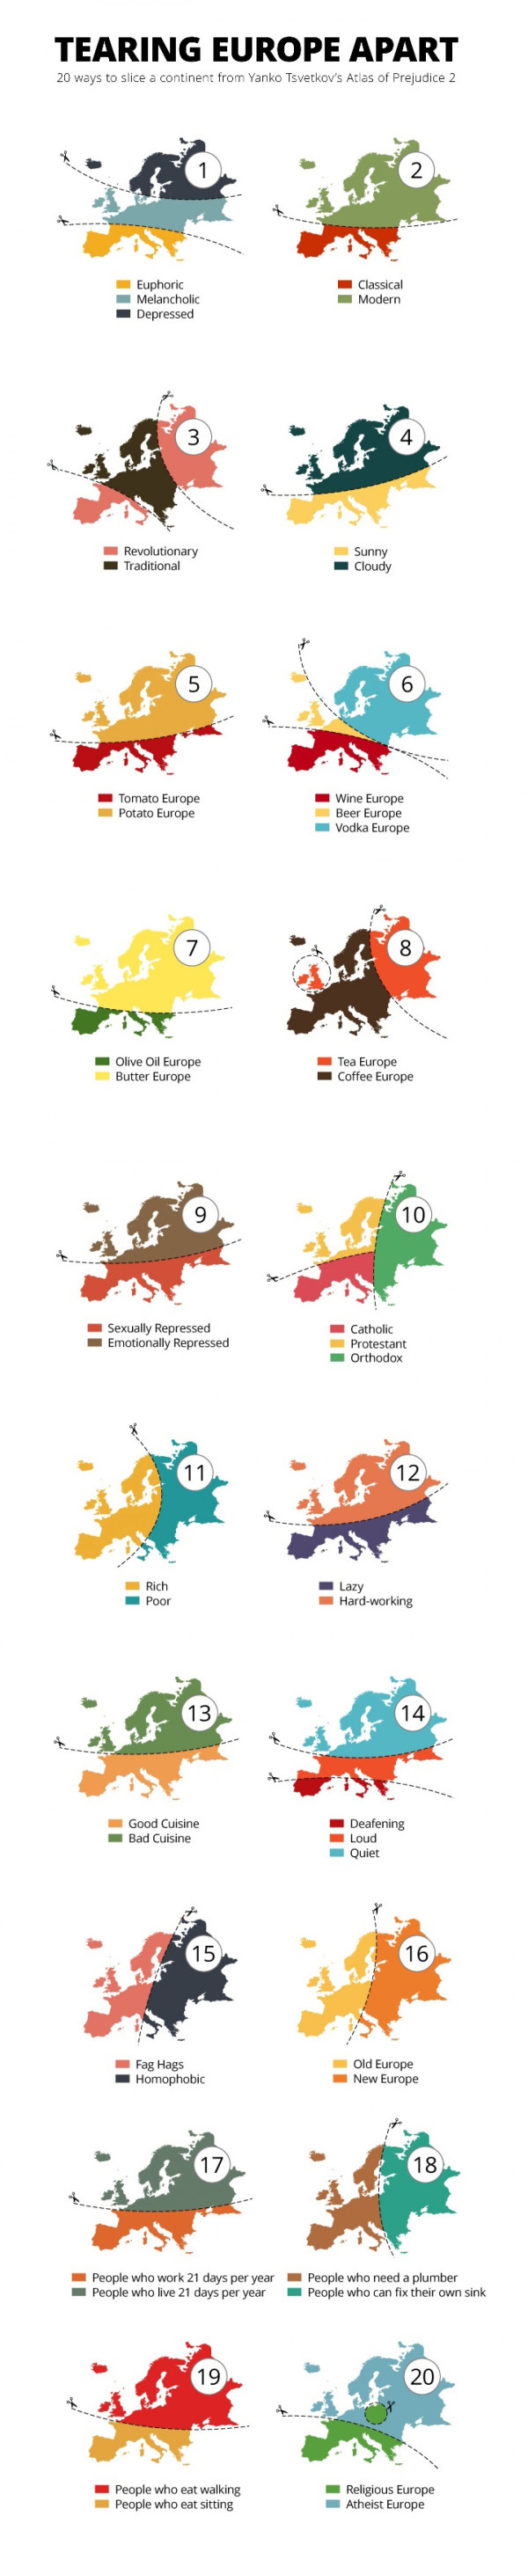 Europe-Infographics-stereotypes-Geoawesomeness